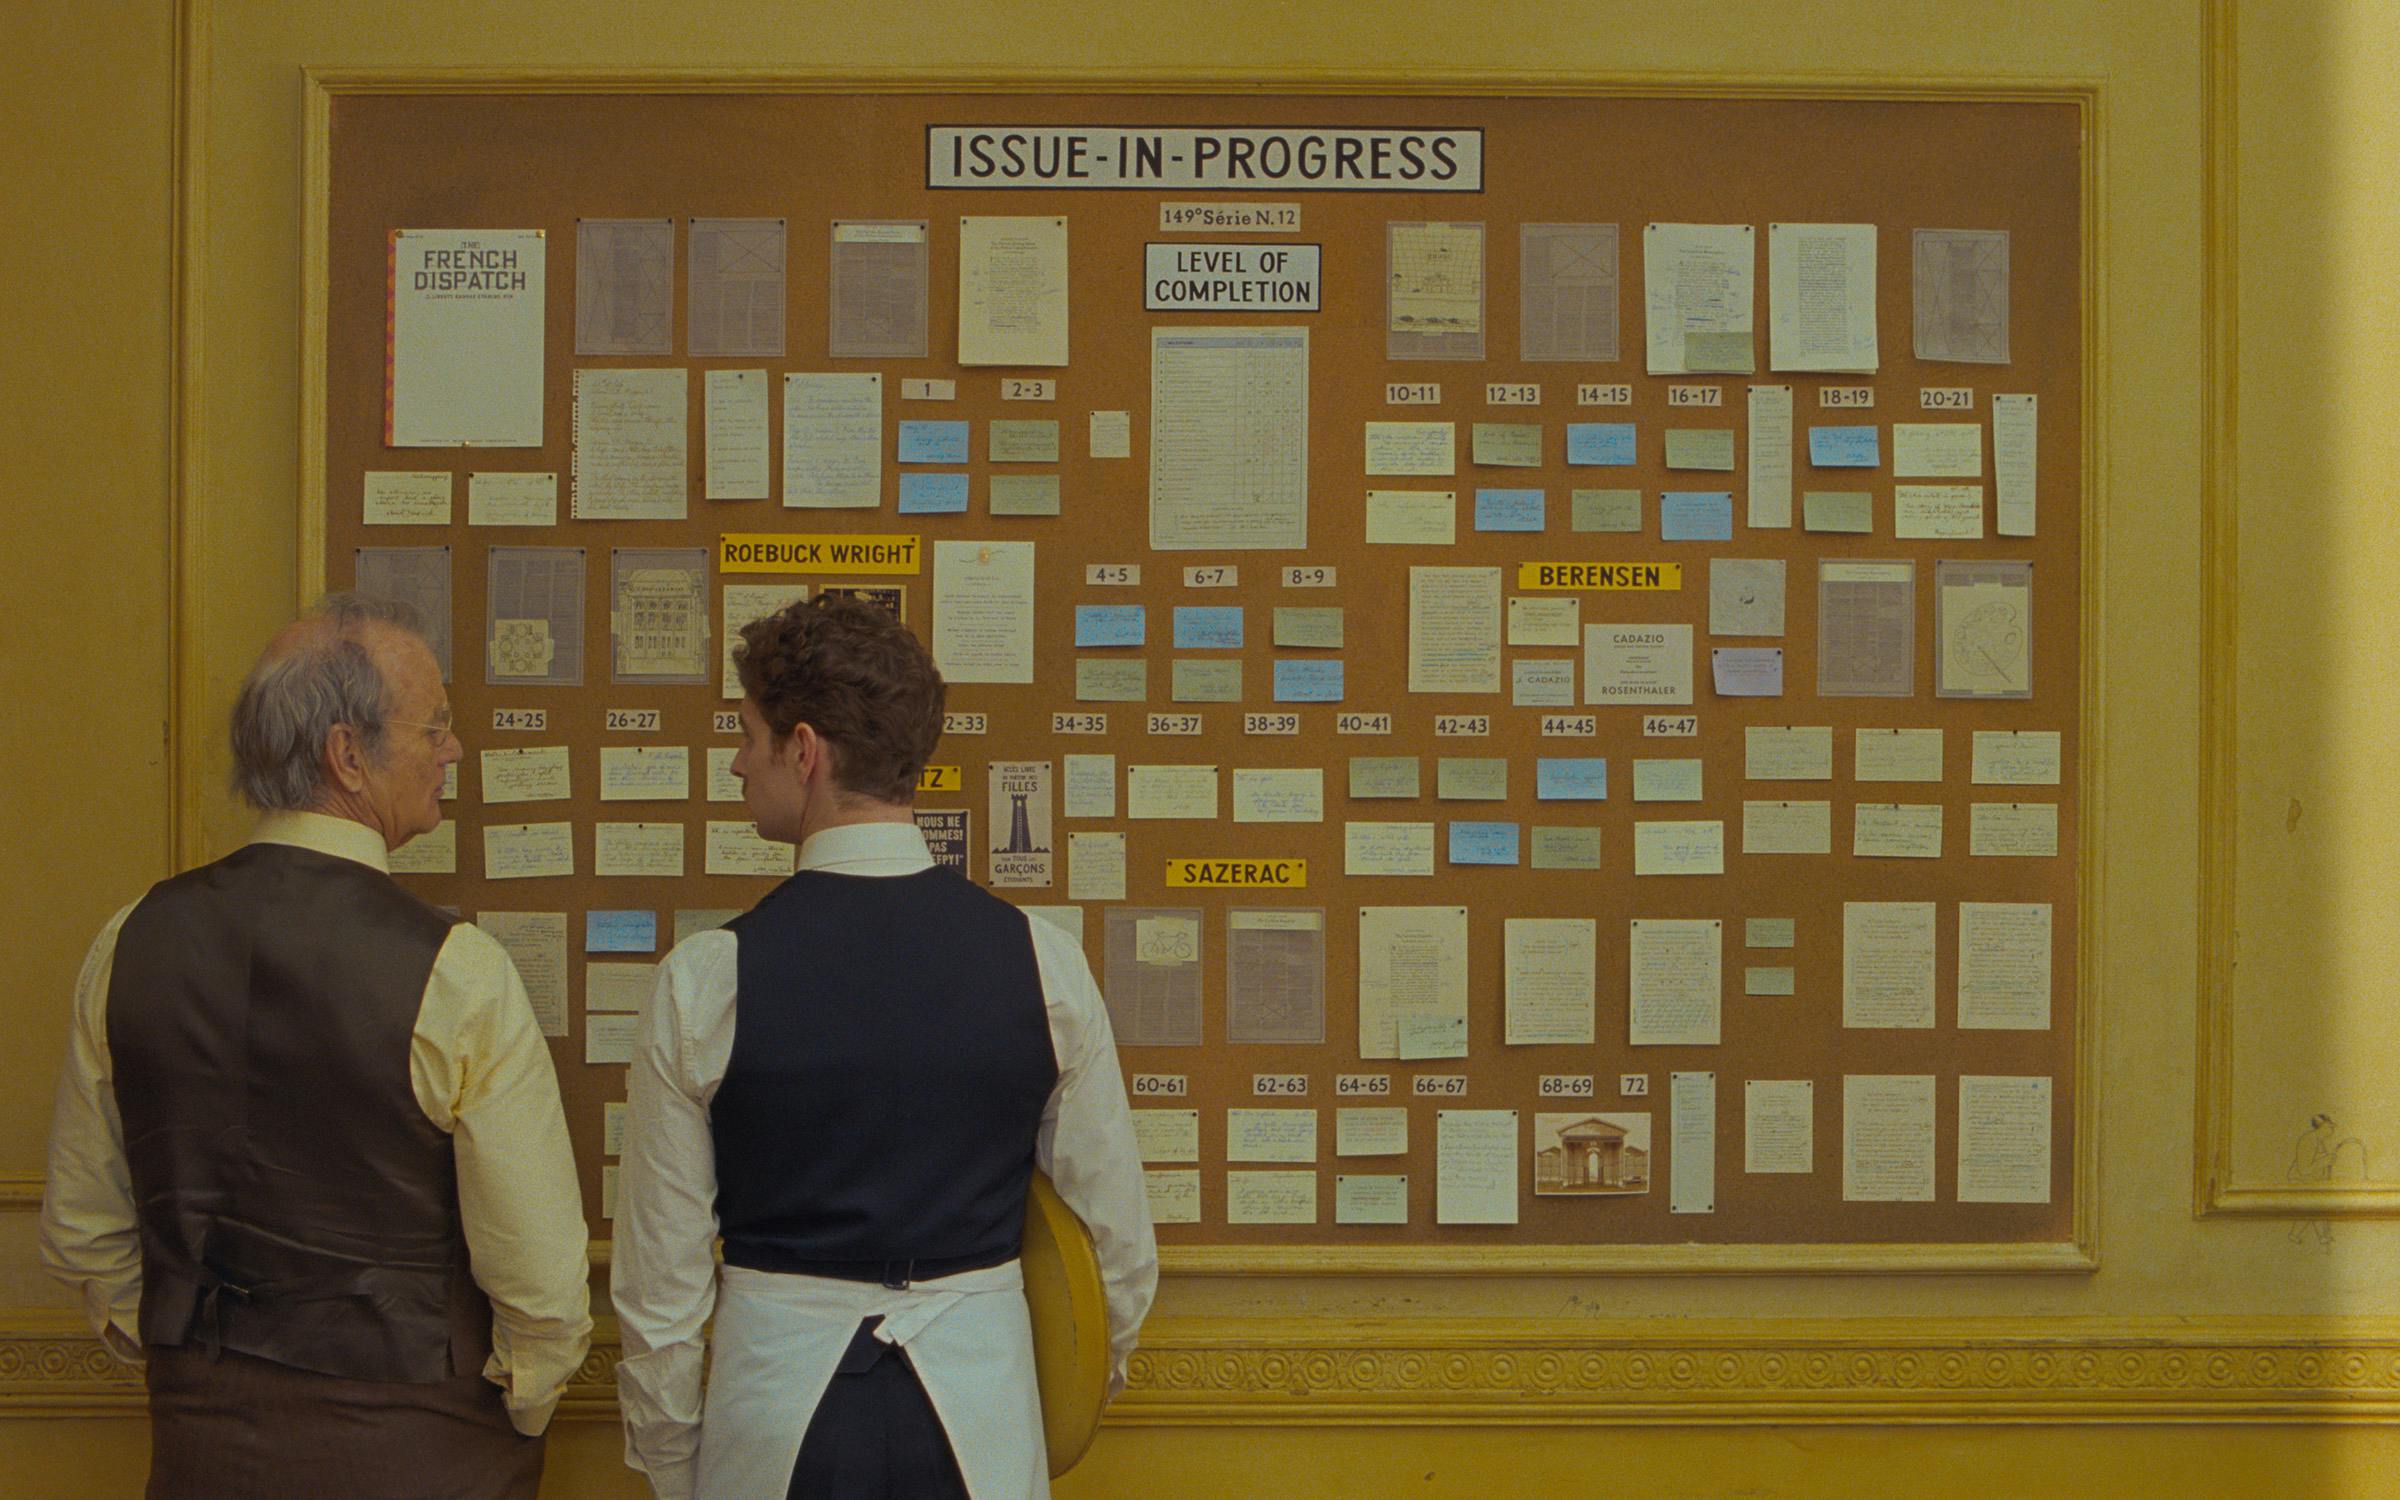 How to Travel Like Wes Anderson